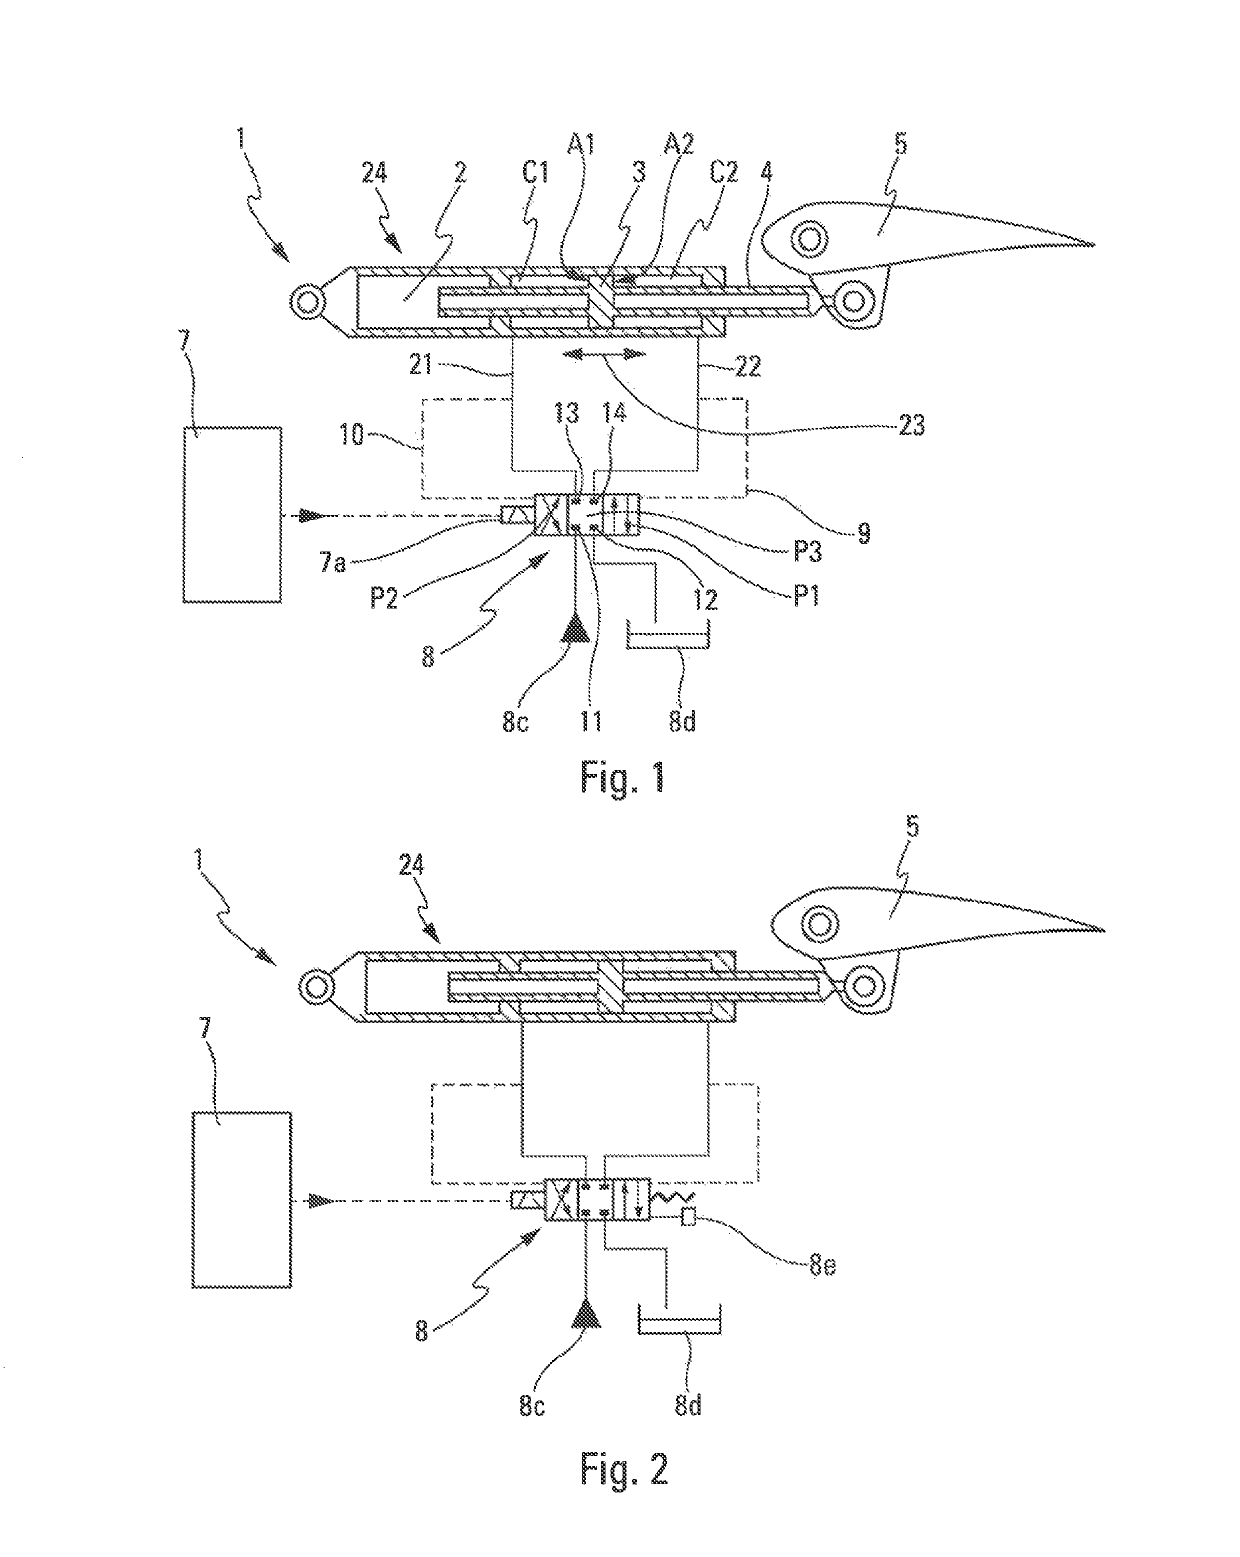 System for actuating a control surface of an aircraft